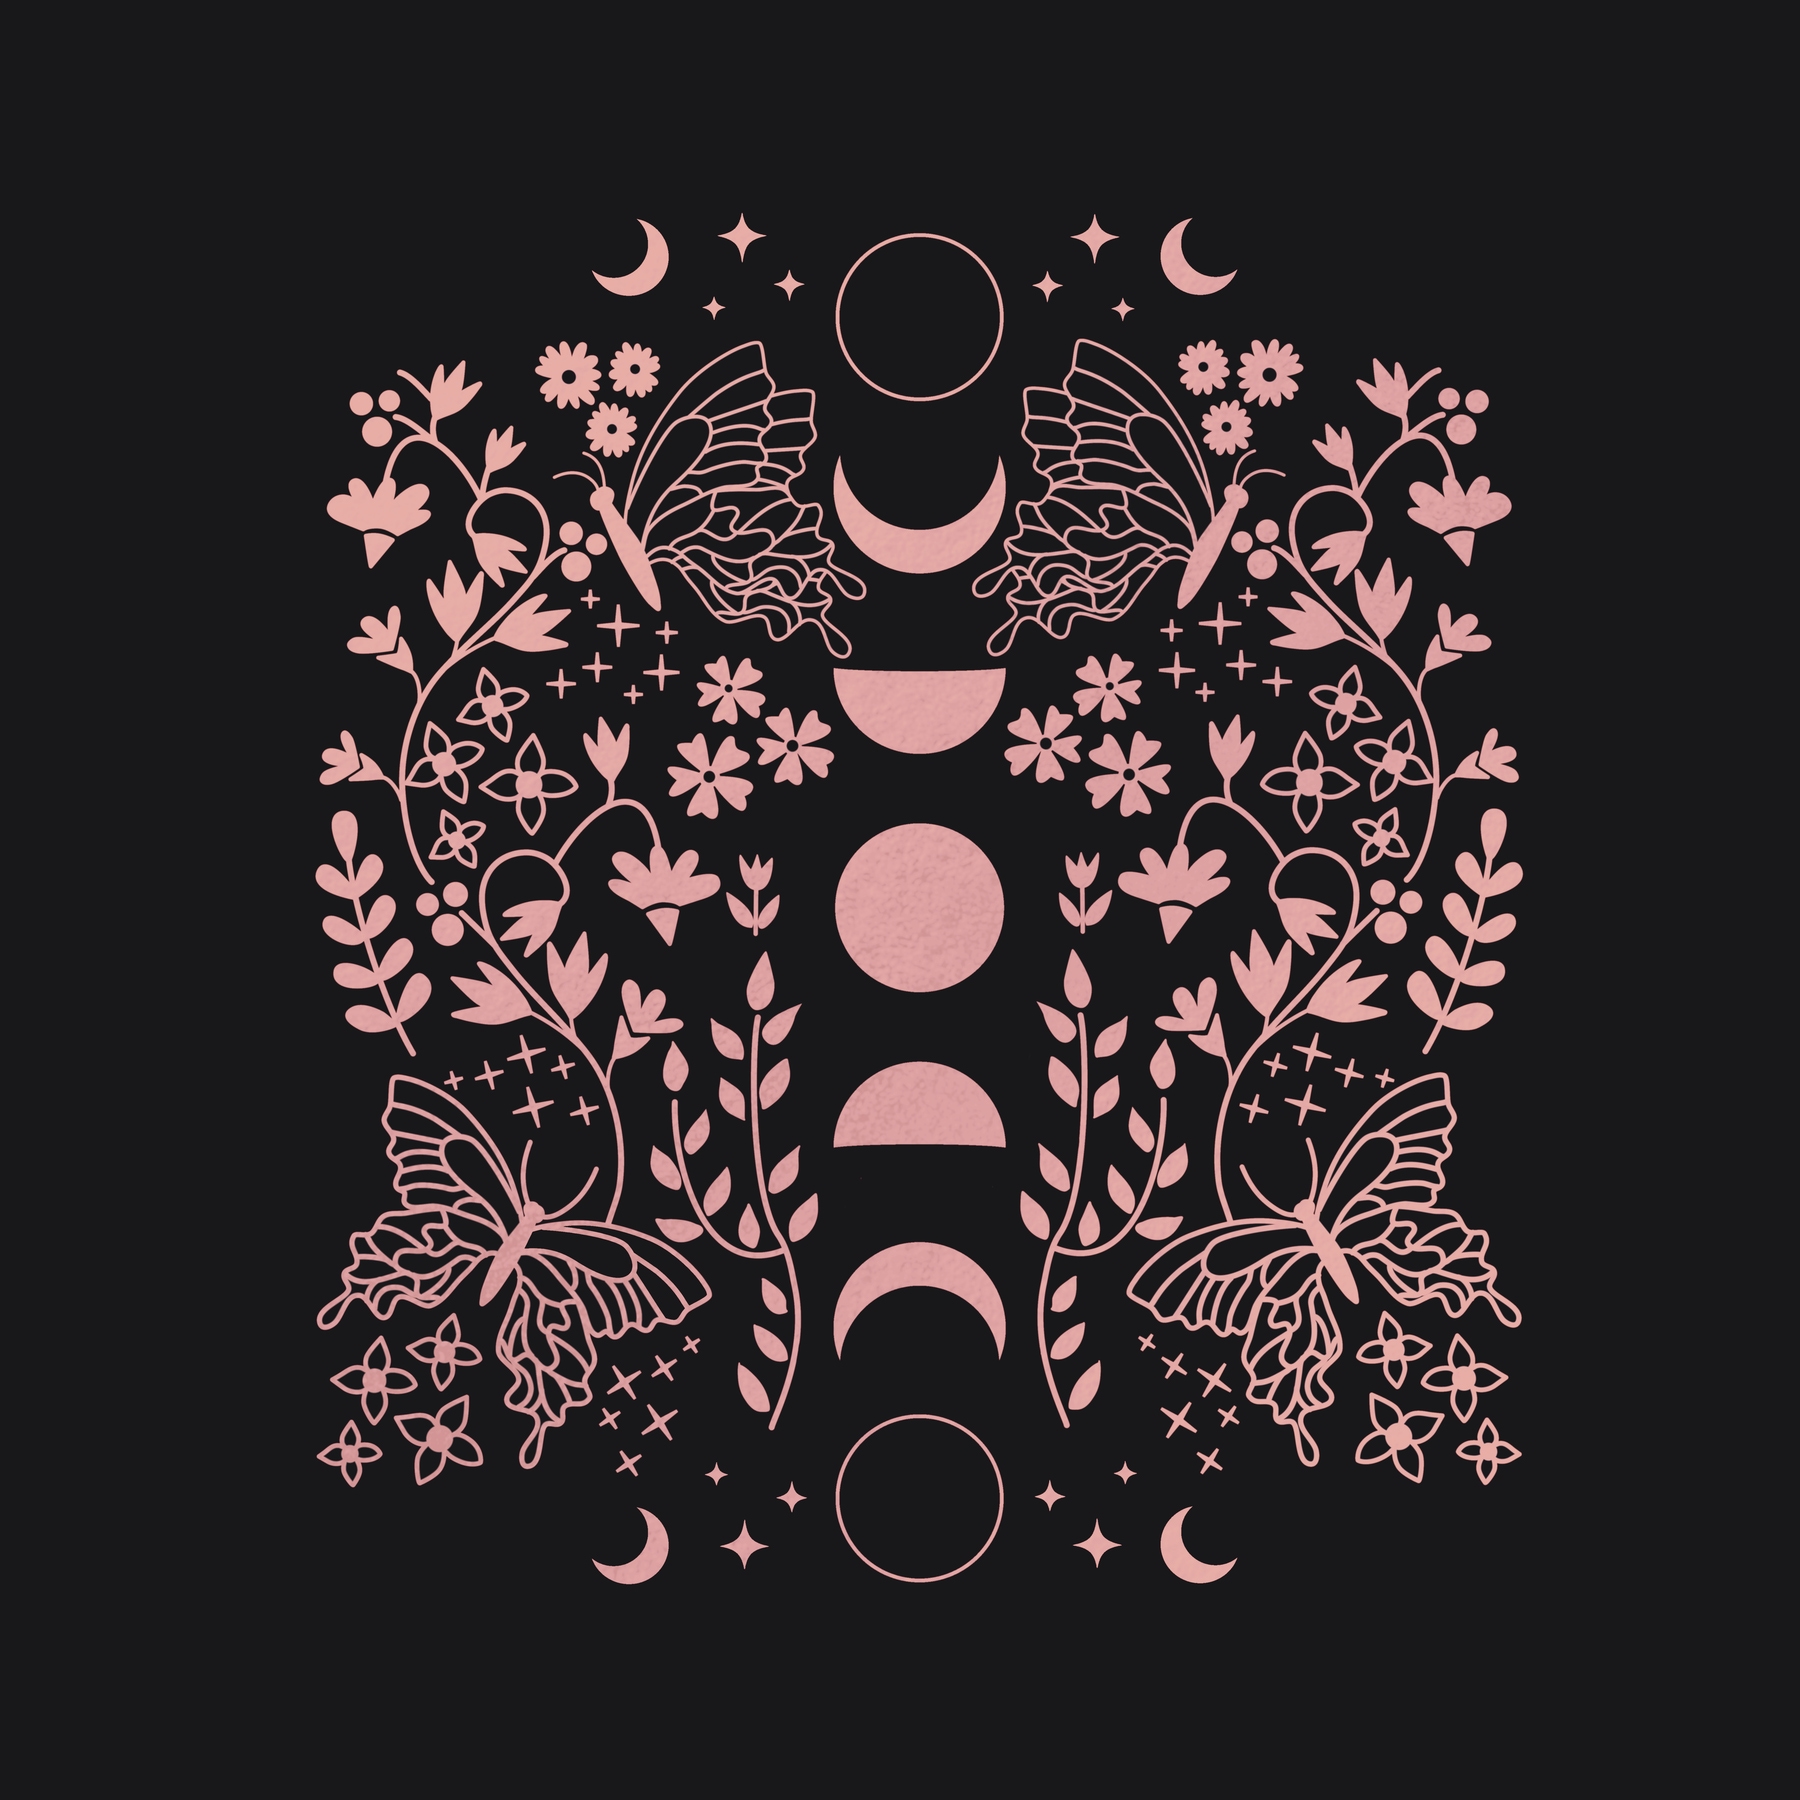 moon phases backgrounds